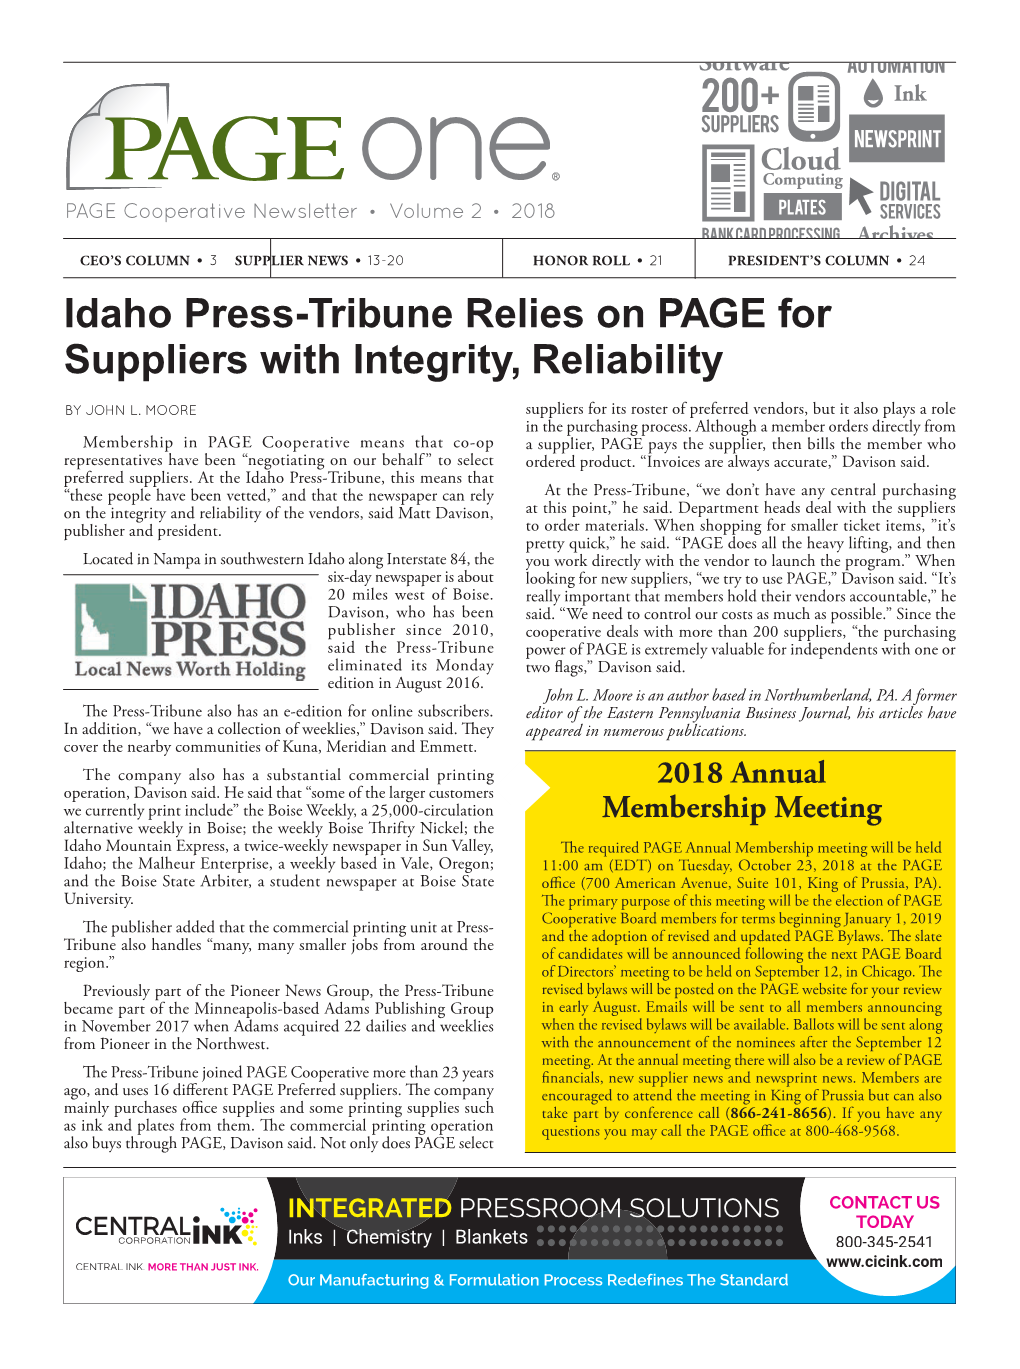 Idaho Press-Tribune Relies on PAGE for Suppliers with Integrity, Reliability